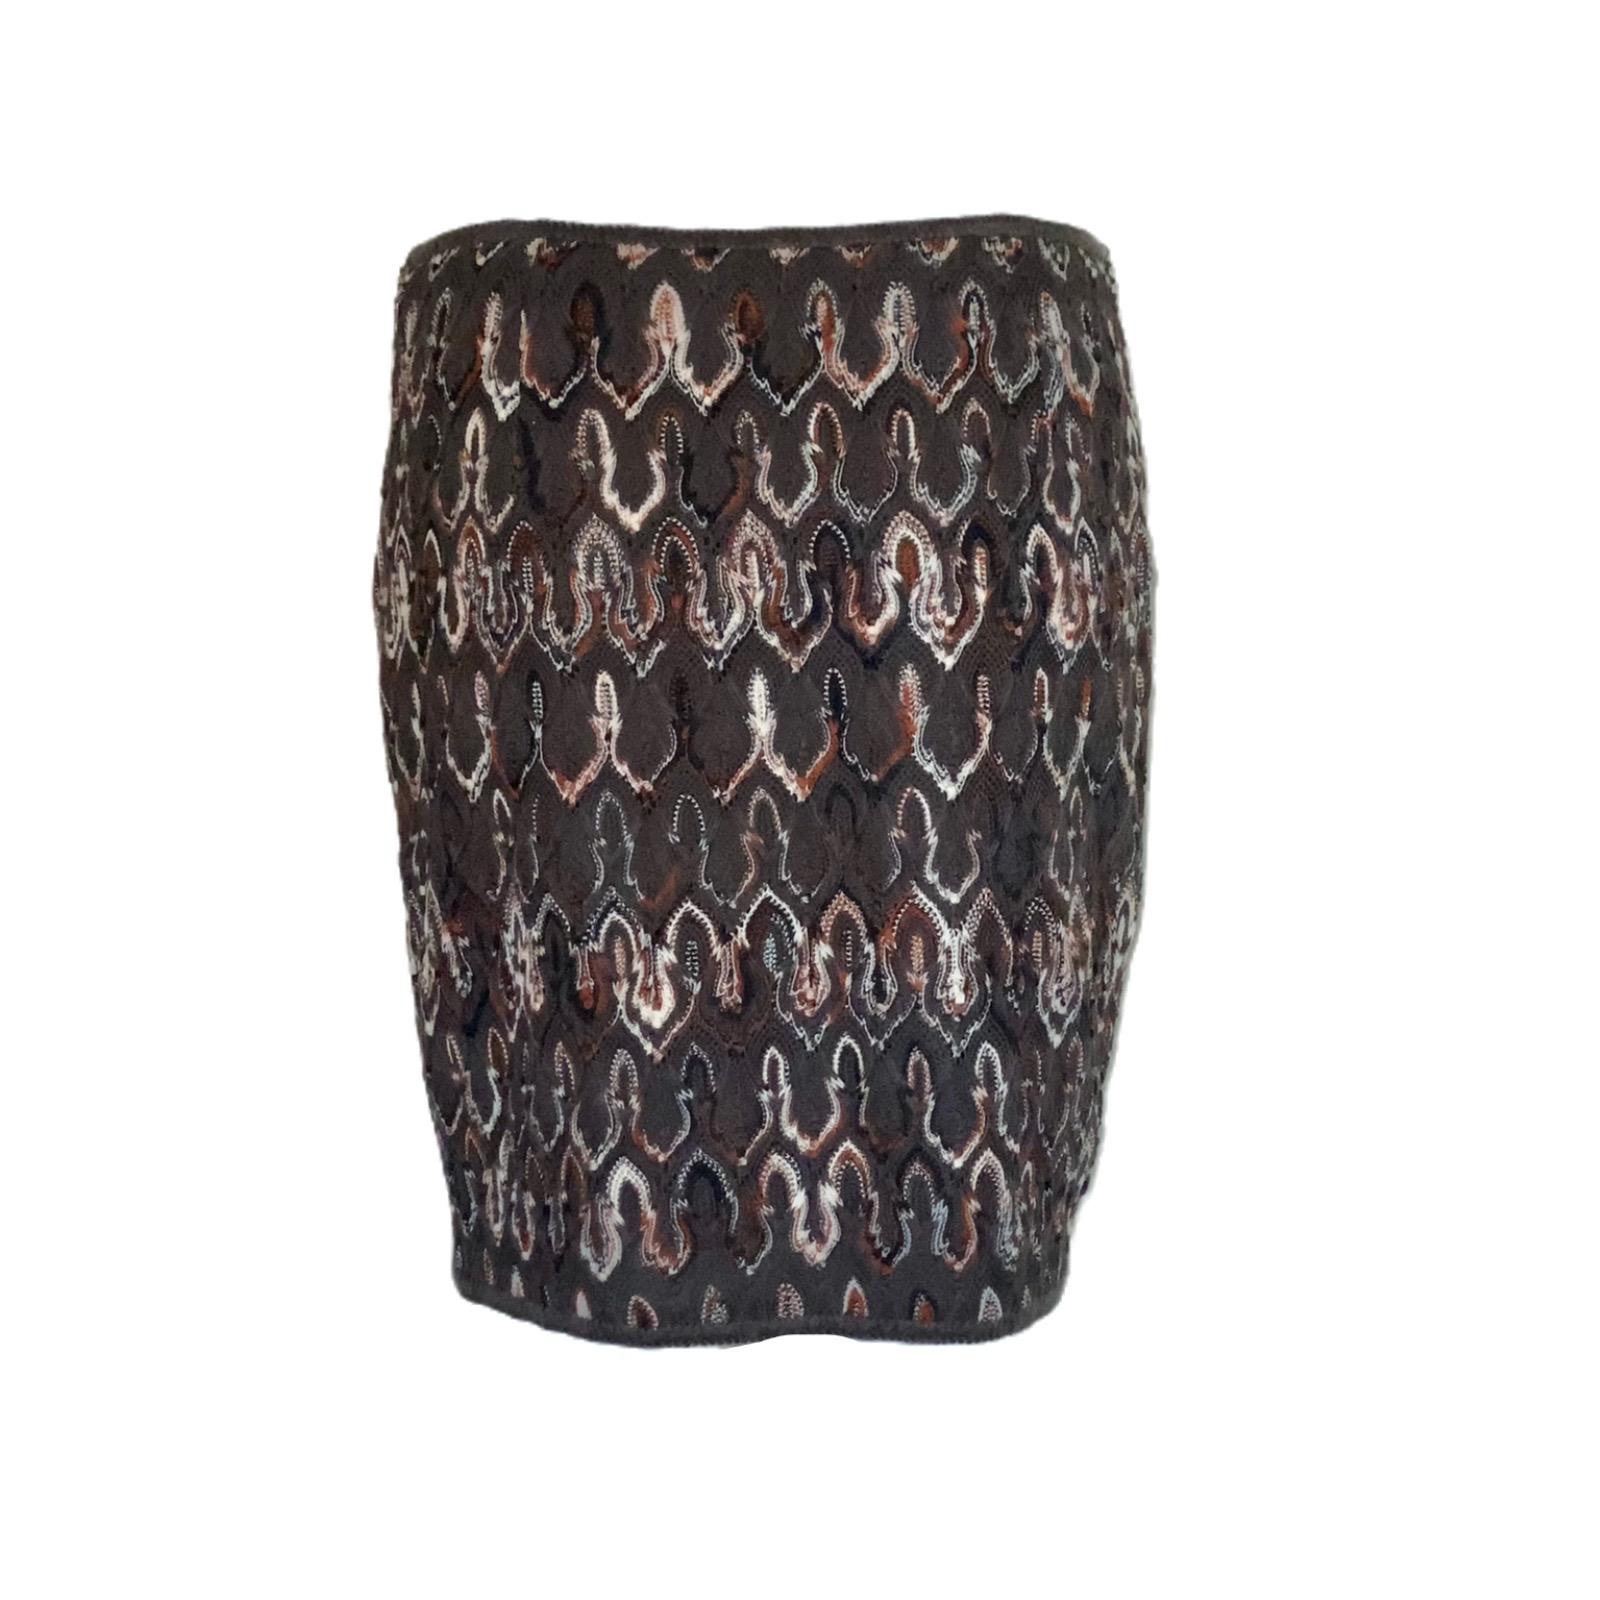 Timeless MISSONI signature crochet knit skirt
    Closes with hidden zipper
    Made in Italy
    Dry Clean only
    Retail price 1199$ plus taxes
Fully lined with stretchy silk
Size 42
New